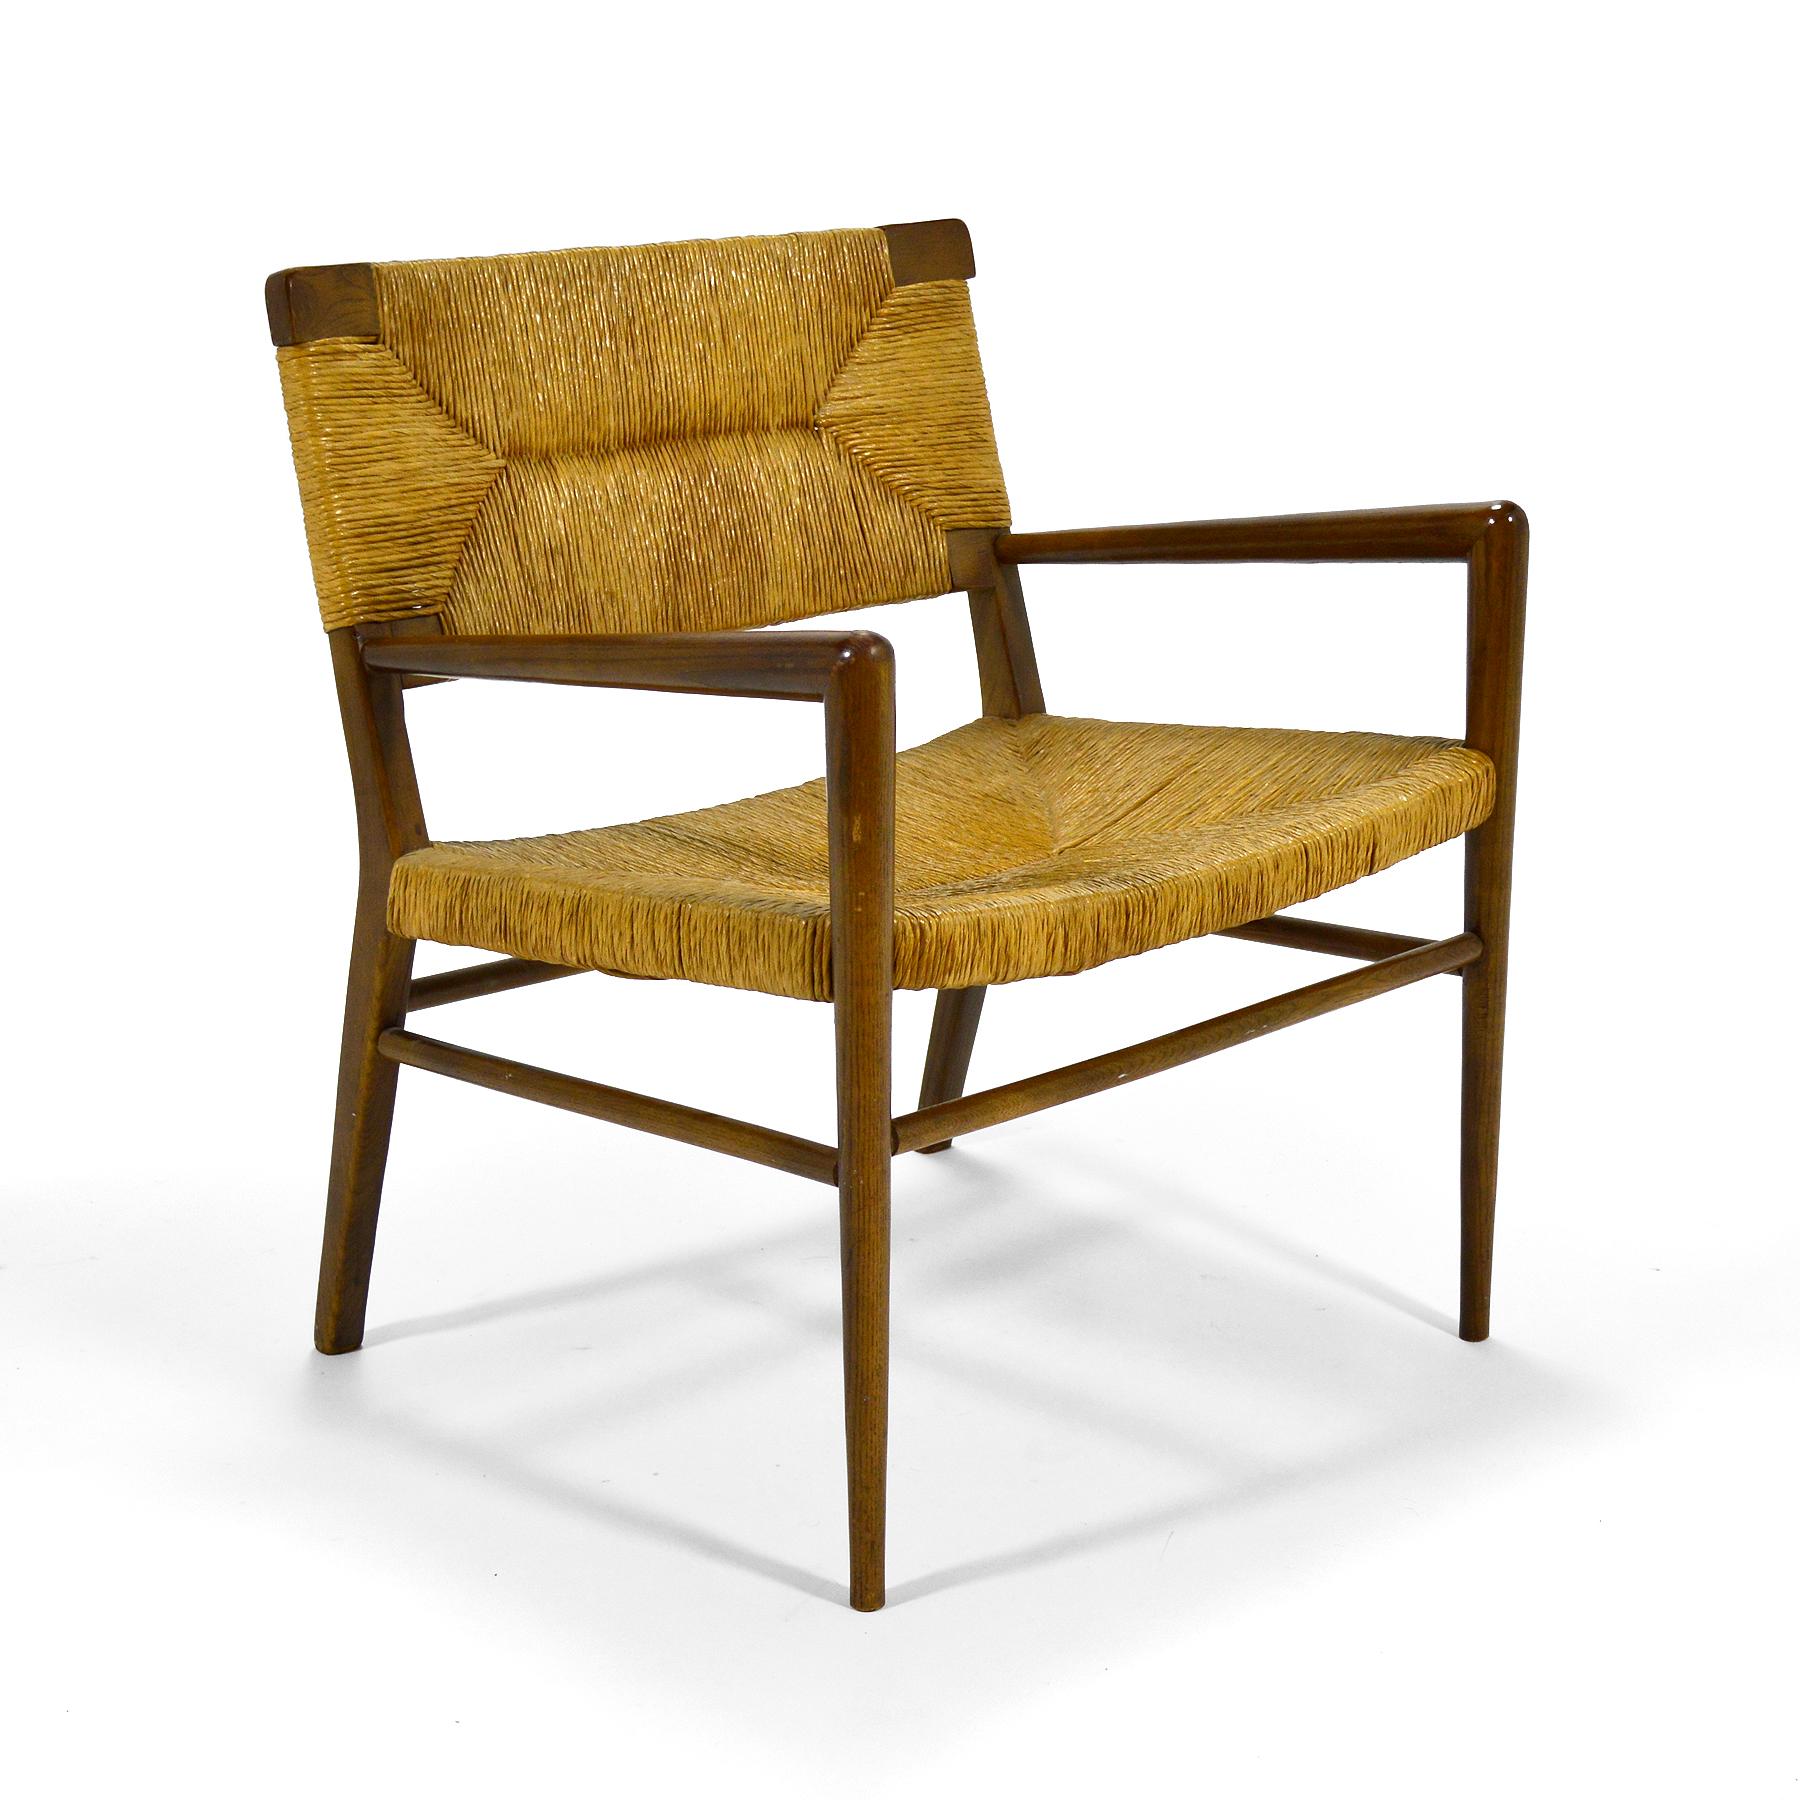 The subtle, almost austere design of Mel Smilow's lounge chair positions it somewhere between a Scandinavian and French aesthetic. The walnut frame supports a seat and back of woven rush. The rakish, angular design points to its midcentury pedigree.